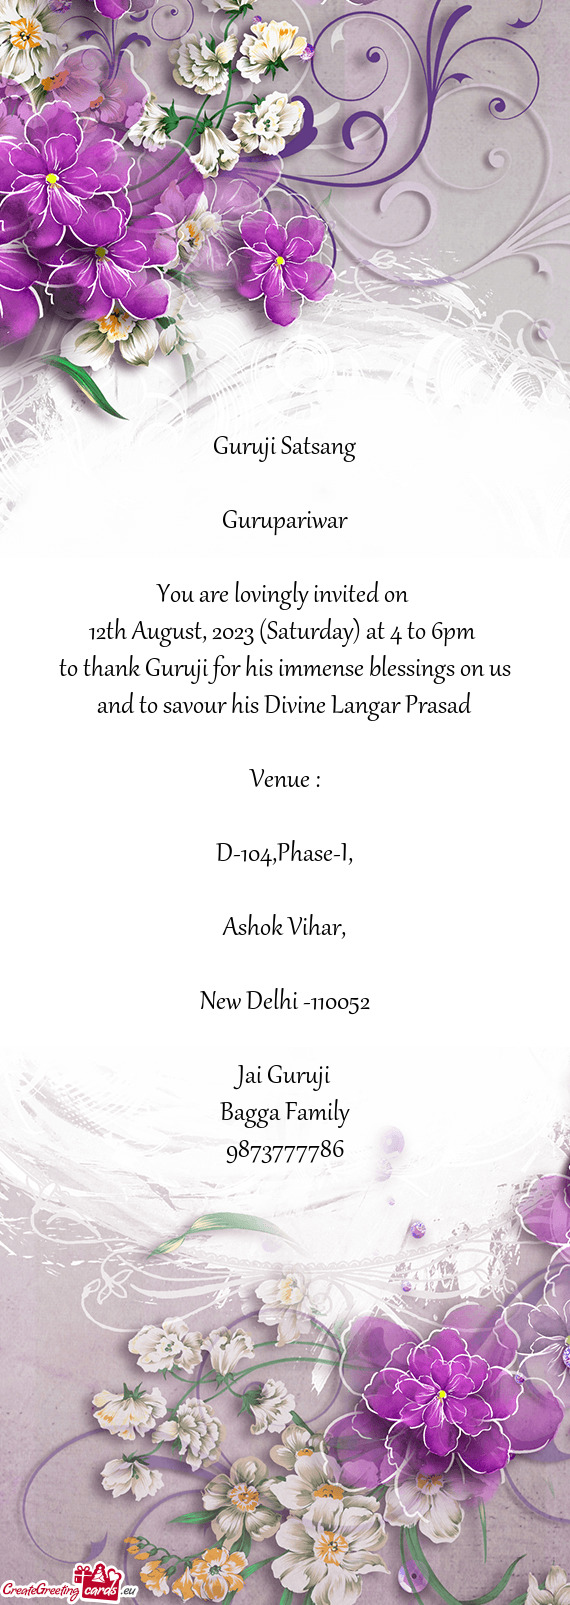 12th August, 2023 (Saturday) at 4 to 6pm